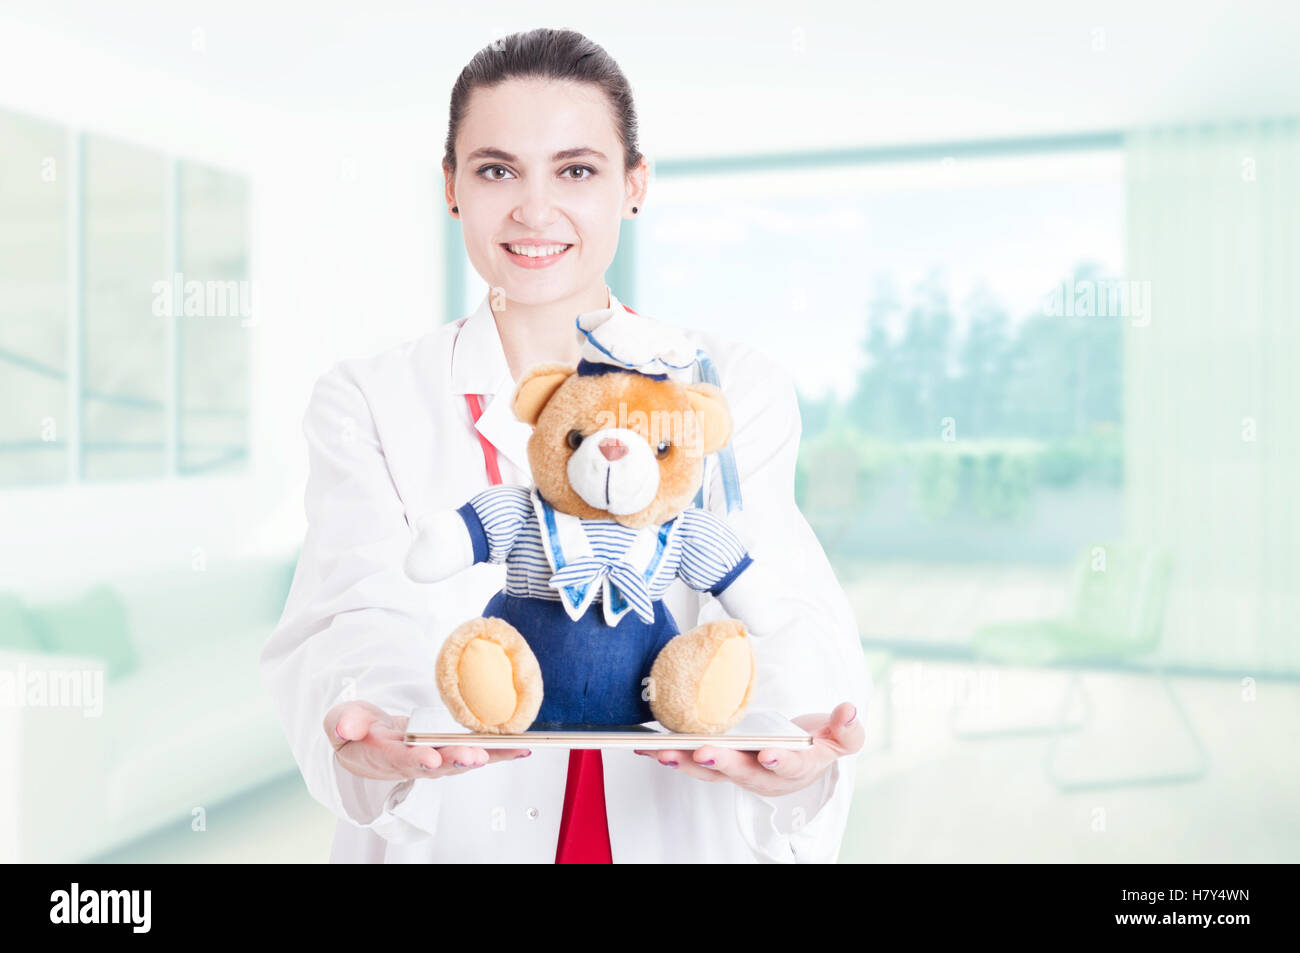 Beautiful and friendly pediatric doctor offering plush bear and tablet Stock Photo